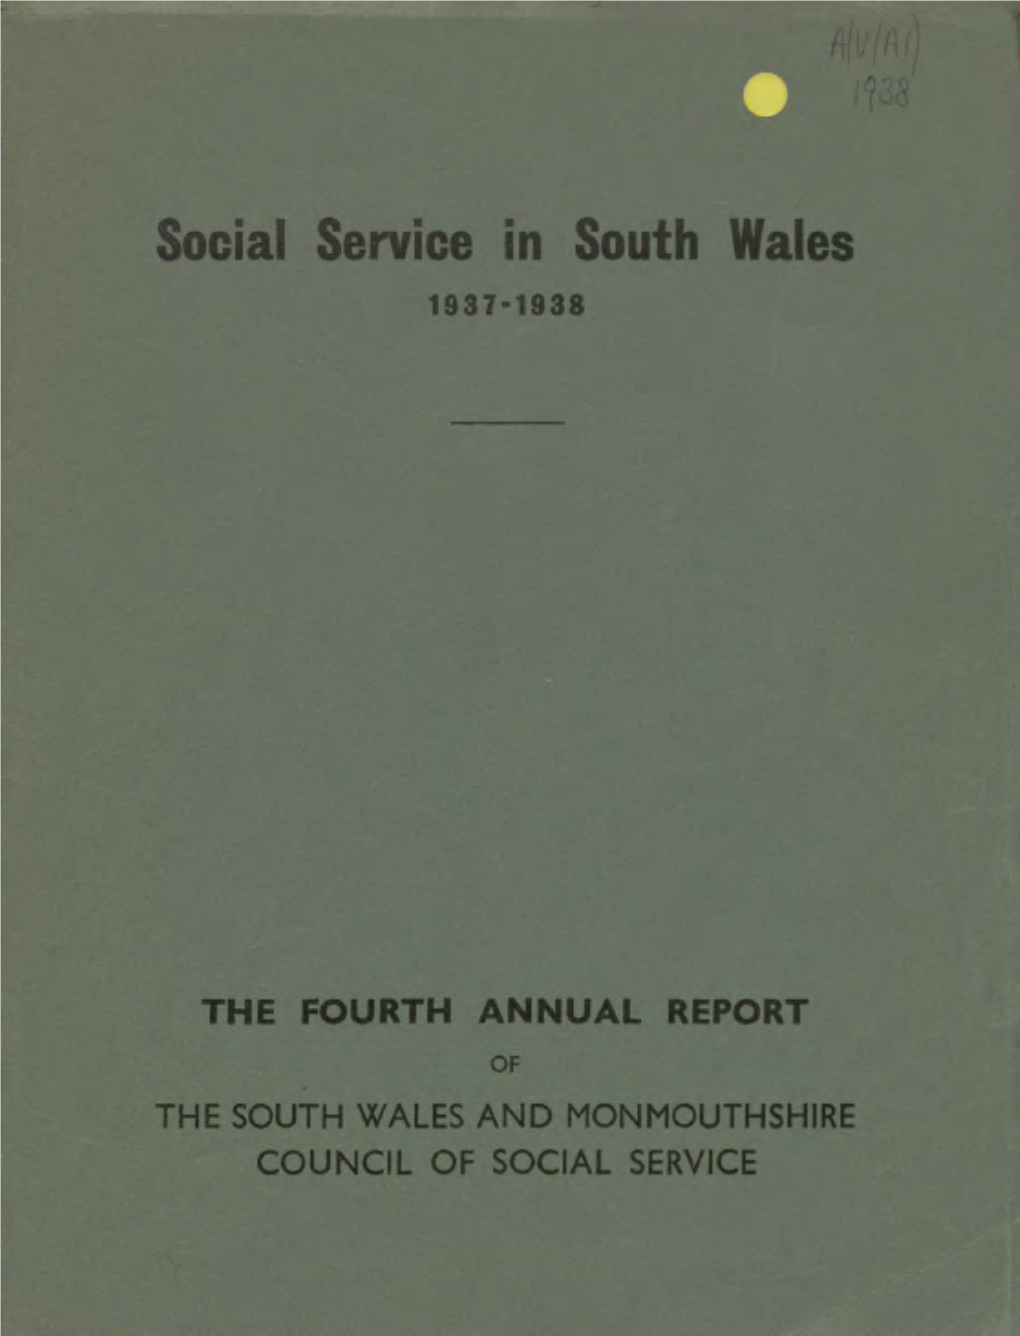 Social Service in South Wales